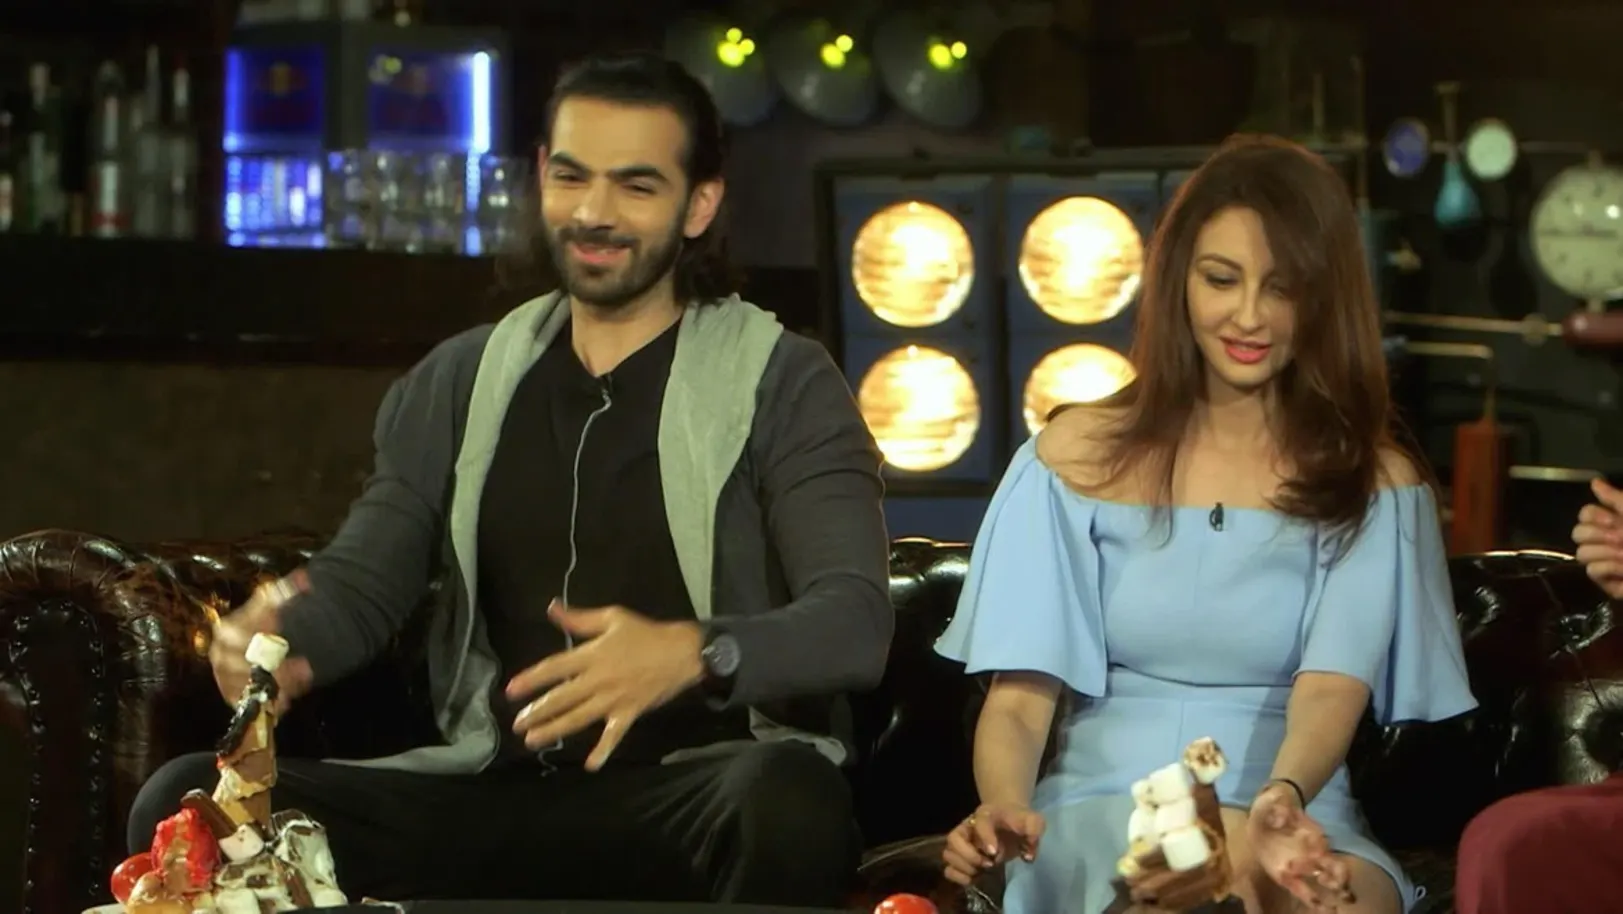 Karan Grover & Saumya Tandon - A Table For Two - Episode 10 - Behind The Scenes 13th May 2019 Webisode